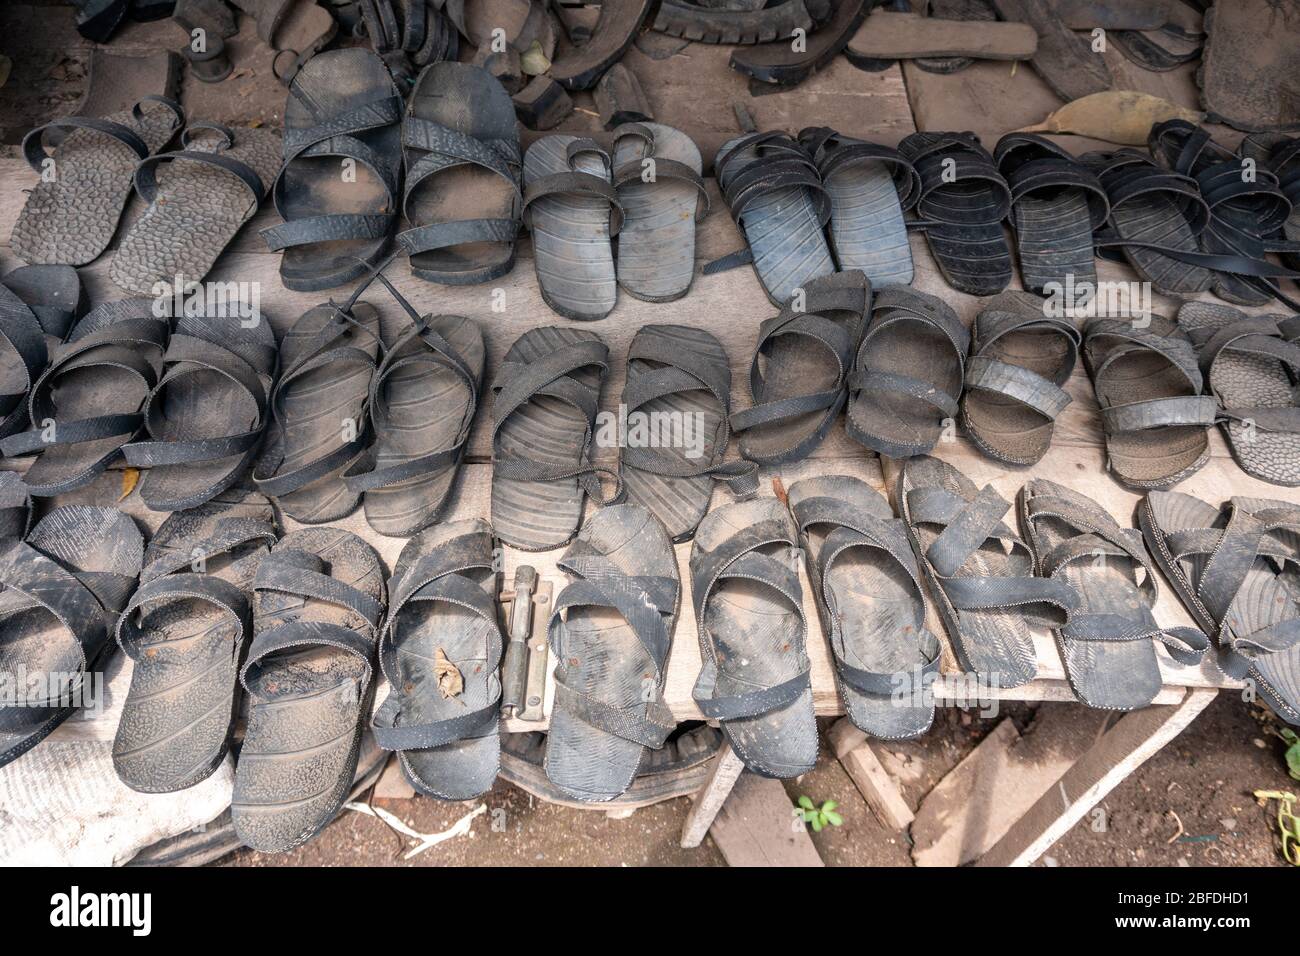 Sandals made of old tires on a local Maasai market in Arusha region,  Tanzania, Africa Stock Photo - Alamy